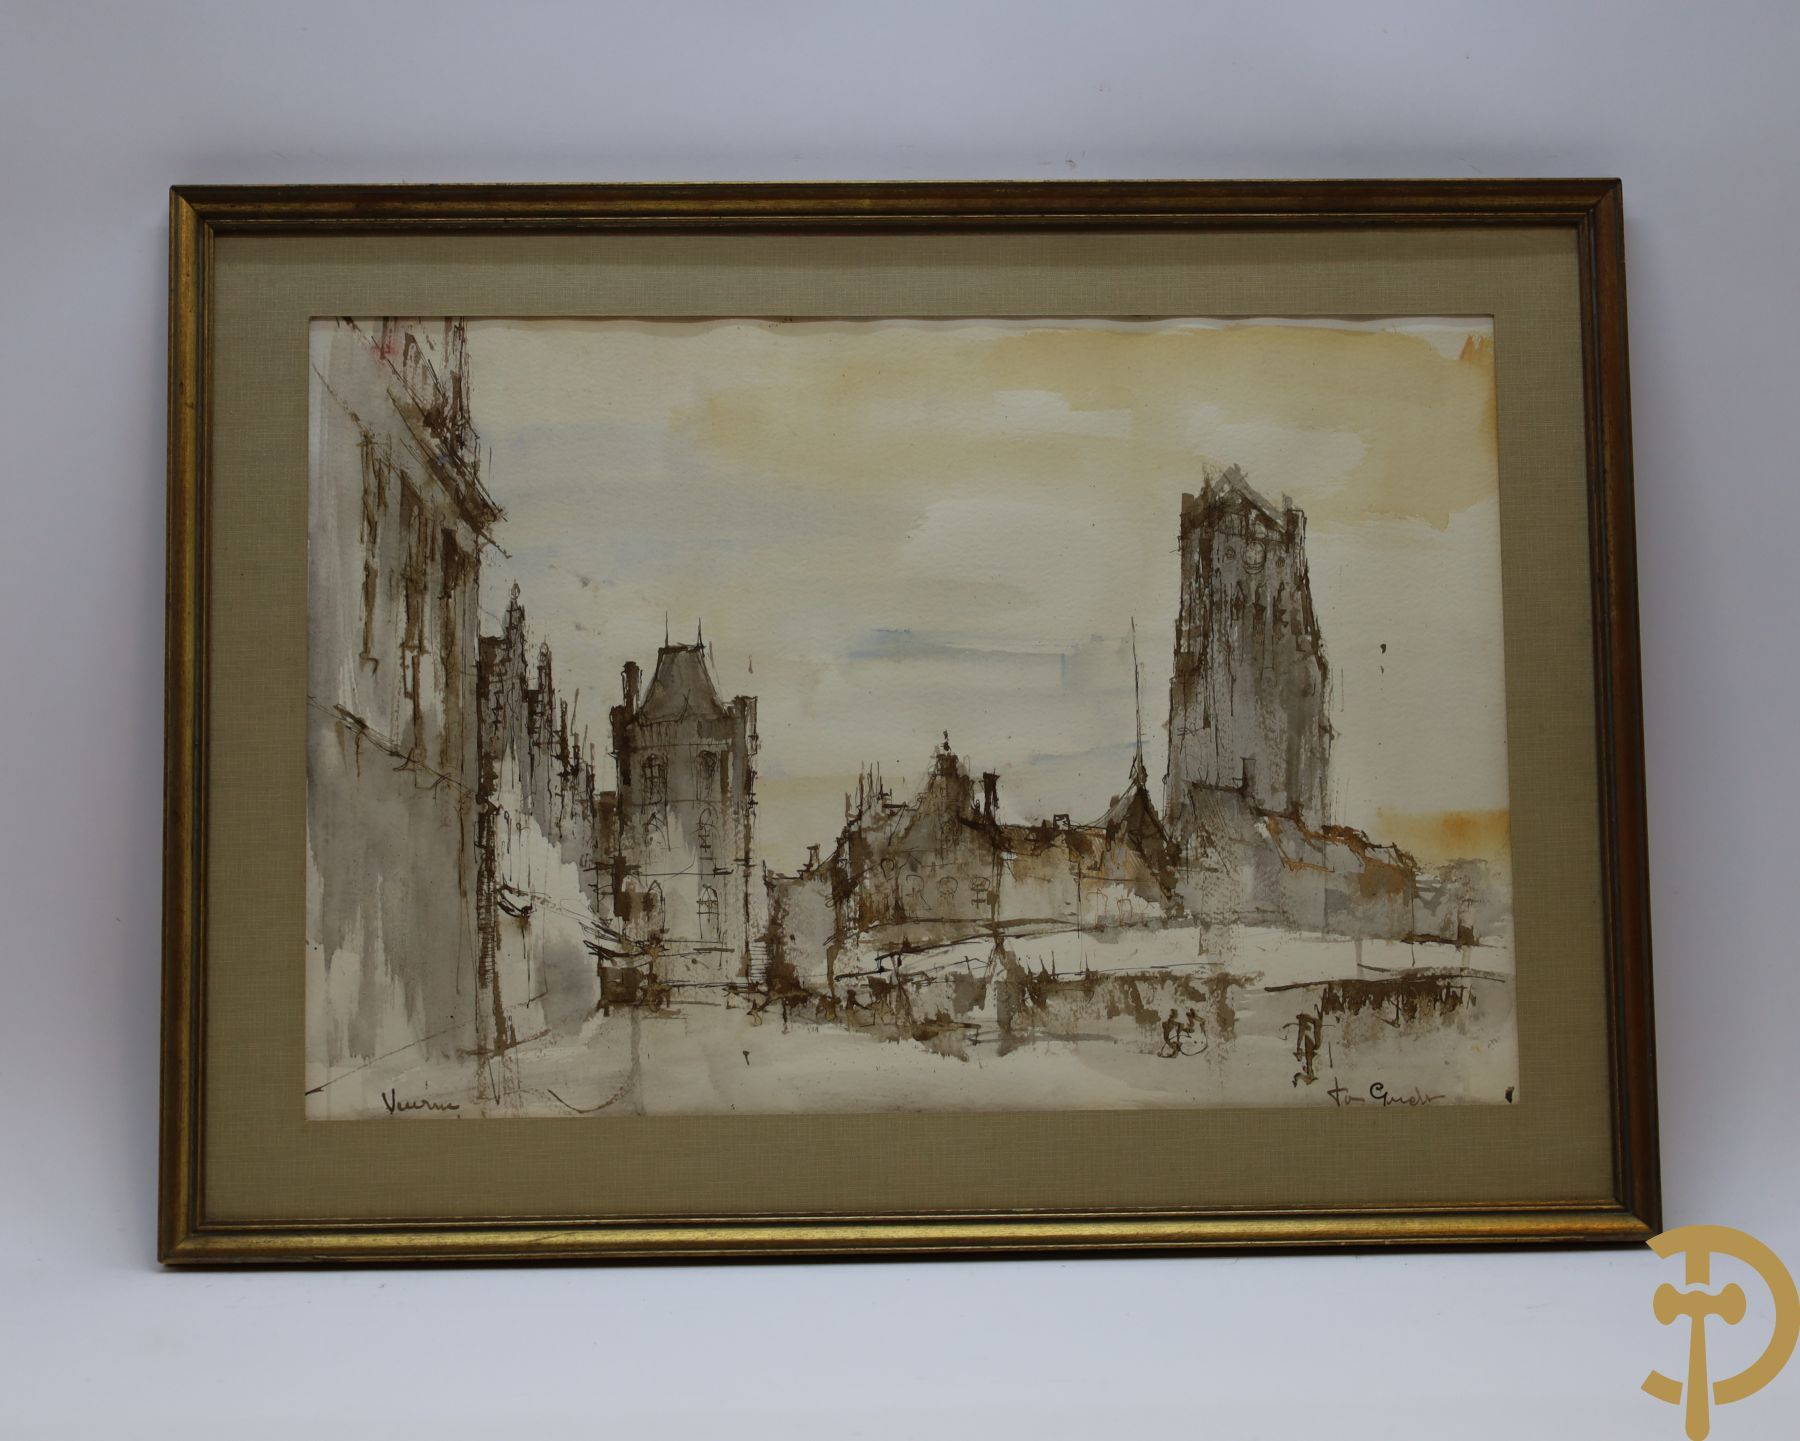 Null VAN GUCHT get. 'View of Veurne' watercolor | 45 x 67 - Dimensions with fram&hellip;